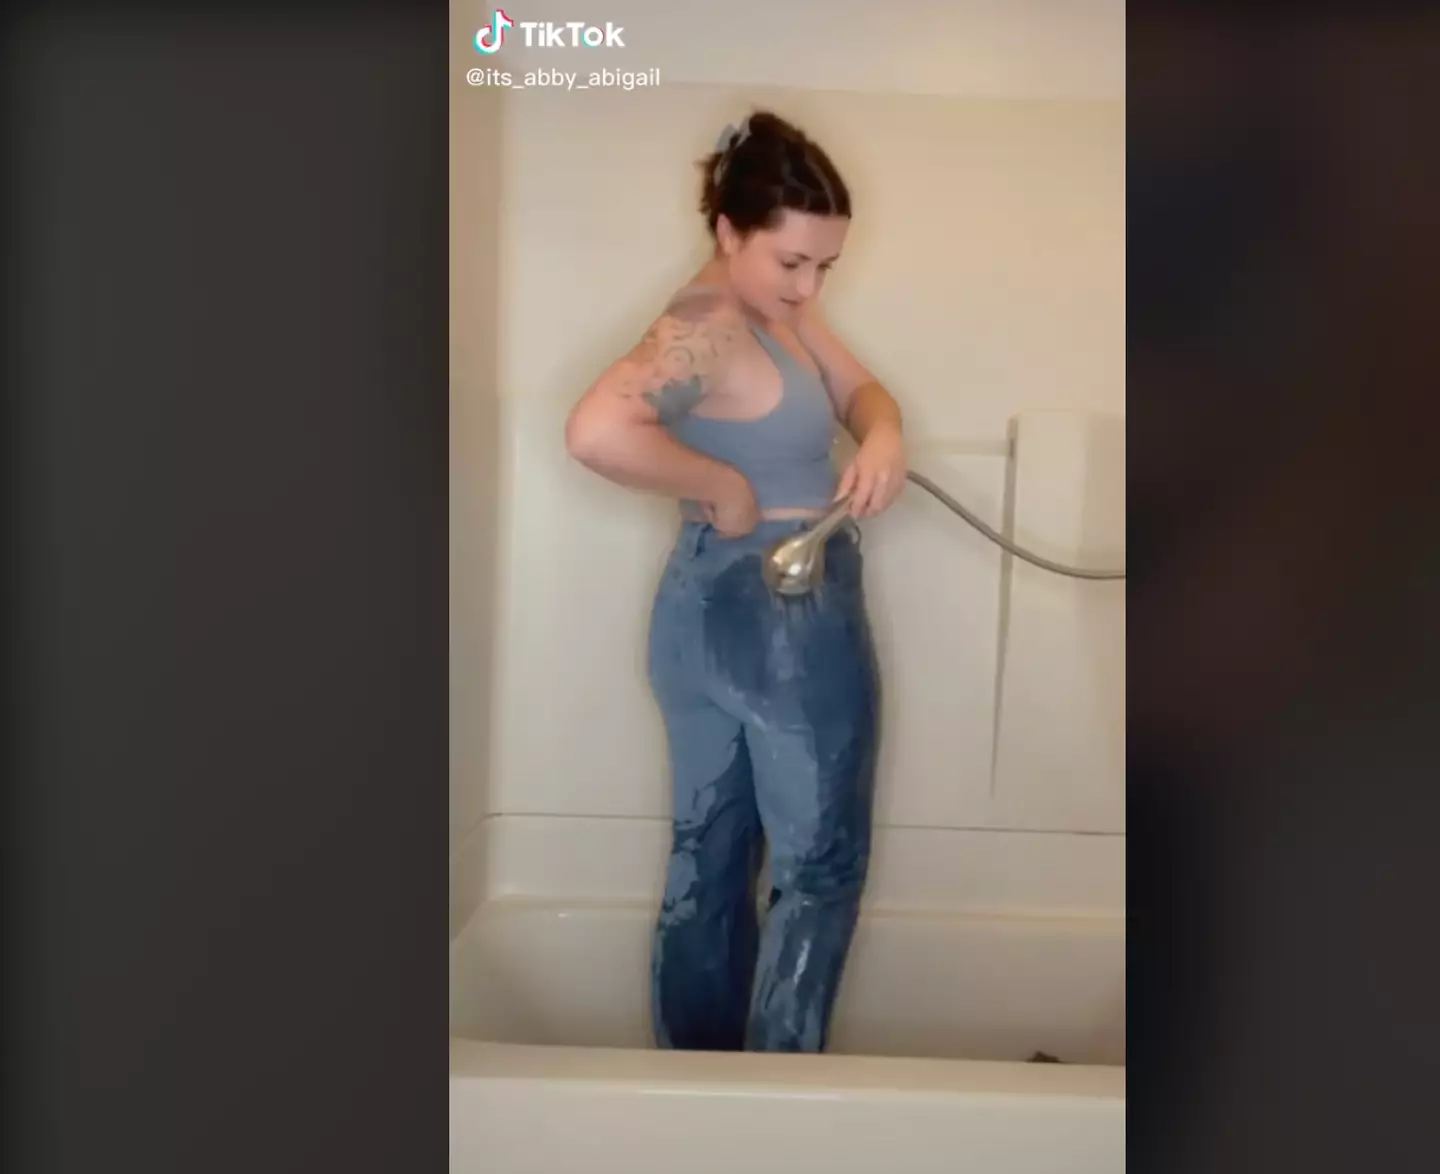 The TikTok hack showed how to make jeans bigger by getting them wet.